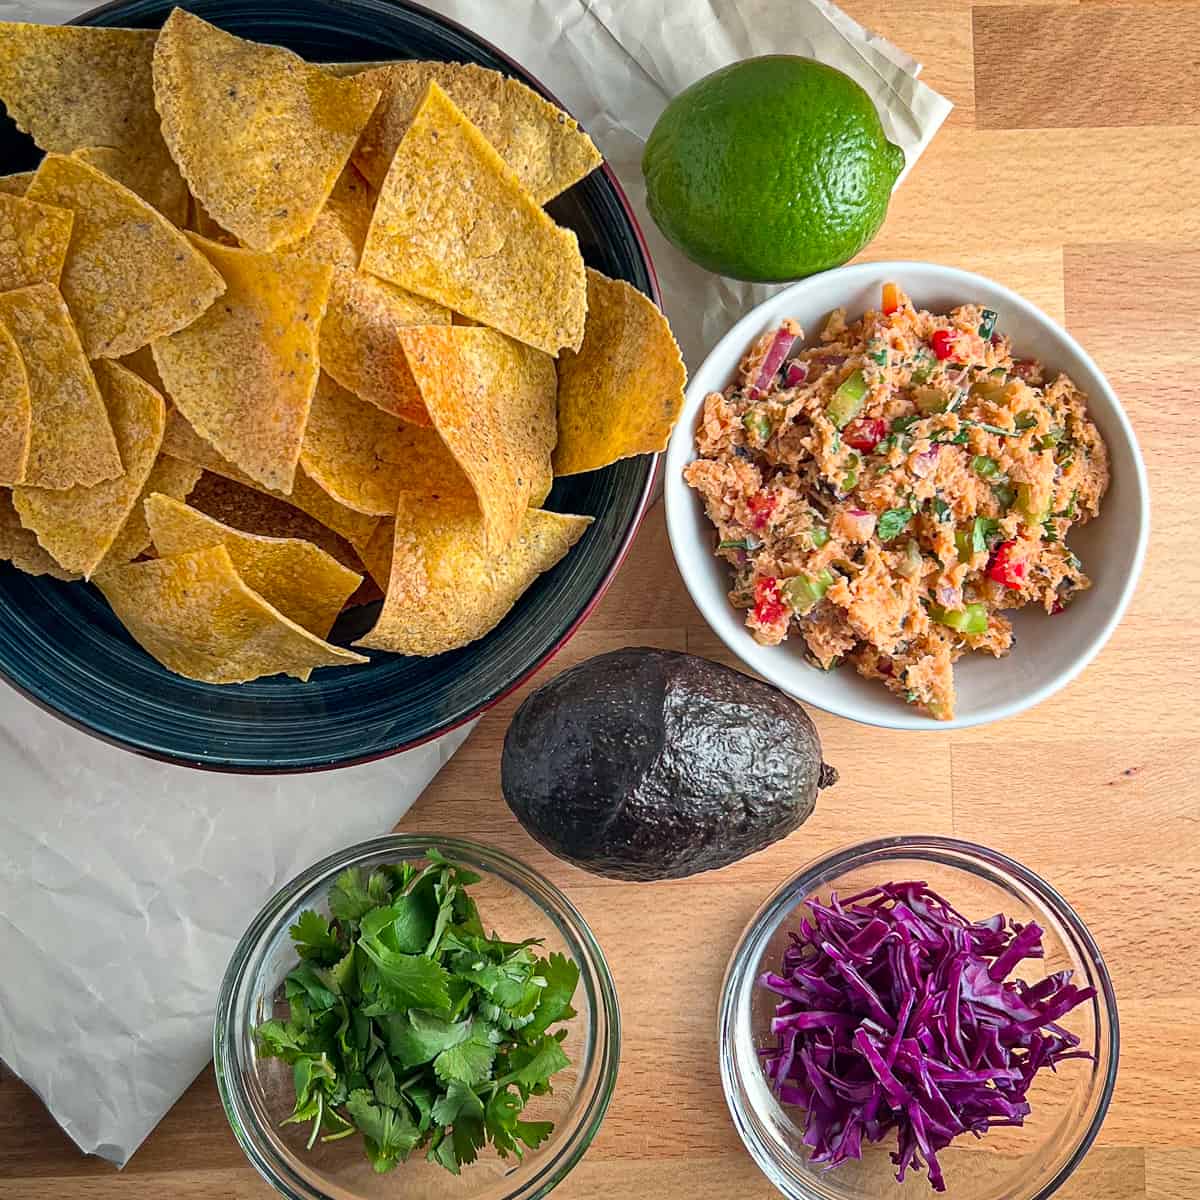 top view of the ingredients for deconstructed vegan fish tacos: oven baked tortilla chips, lime, vegan tuna salad, avocado, fresh cilantro and purple cabbage